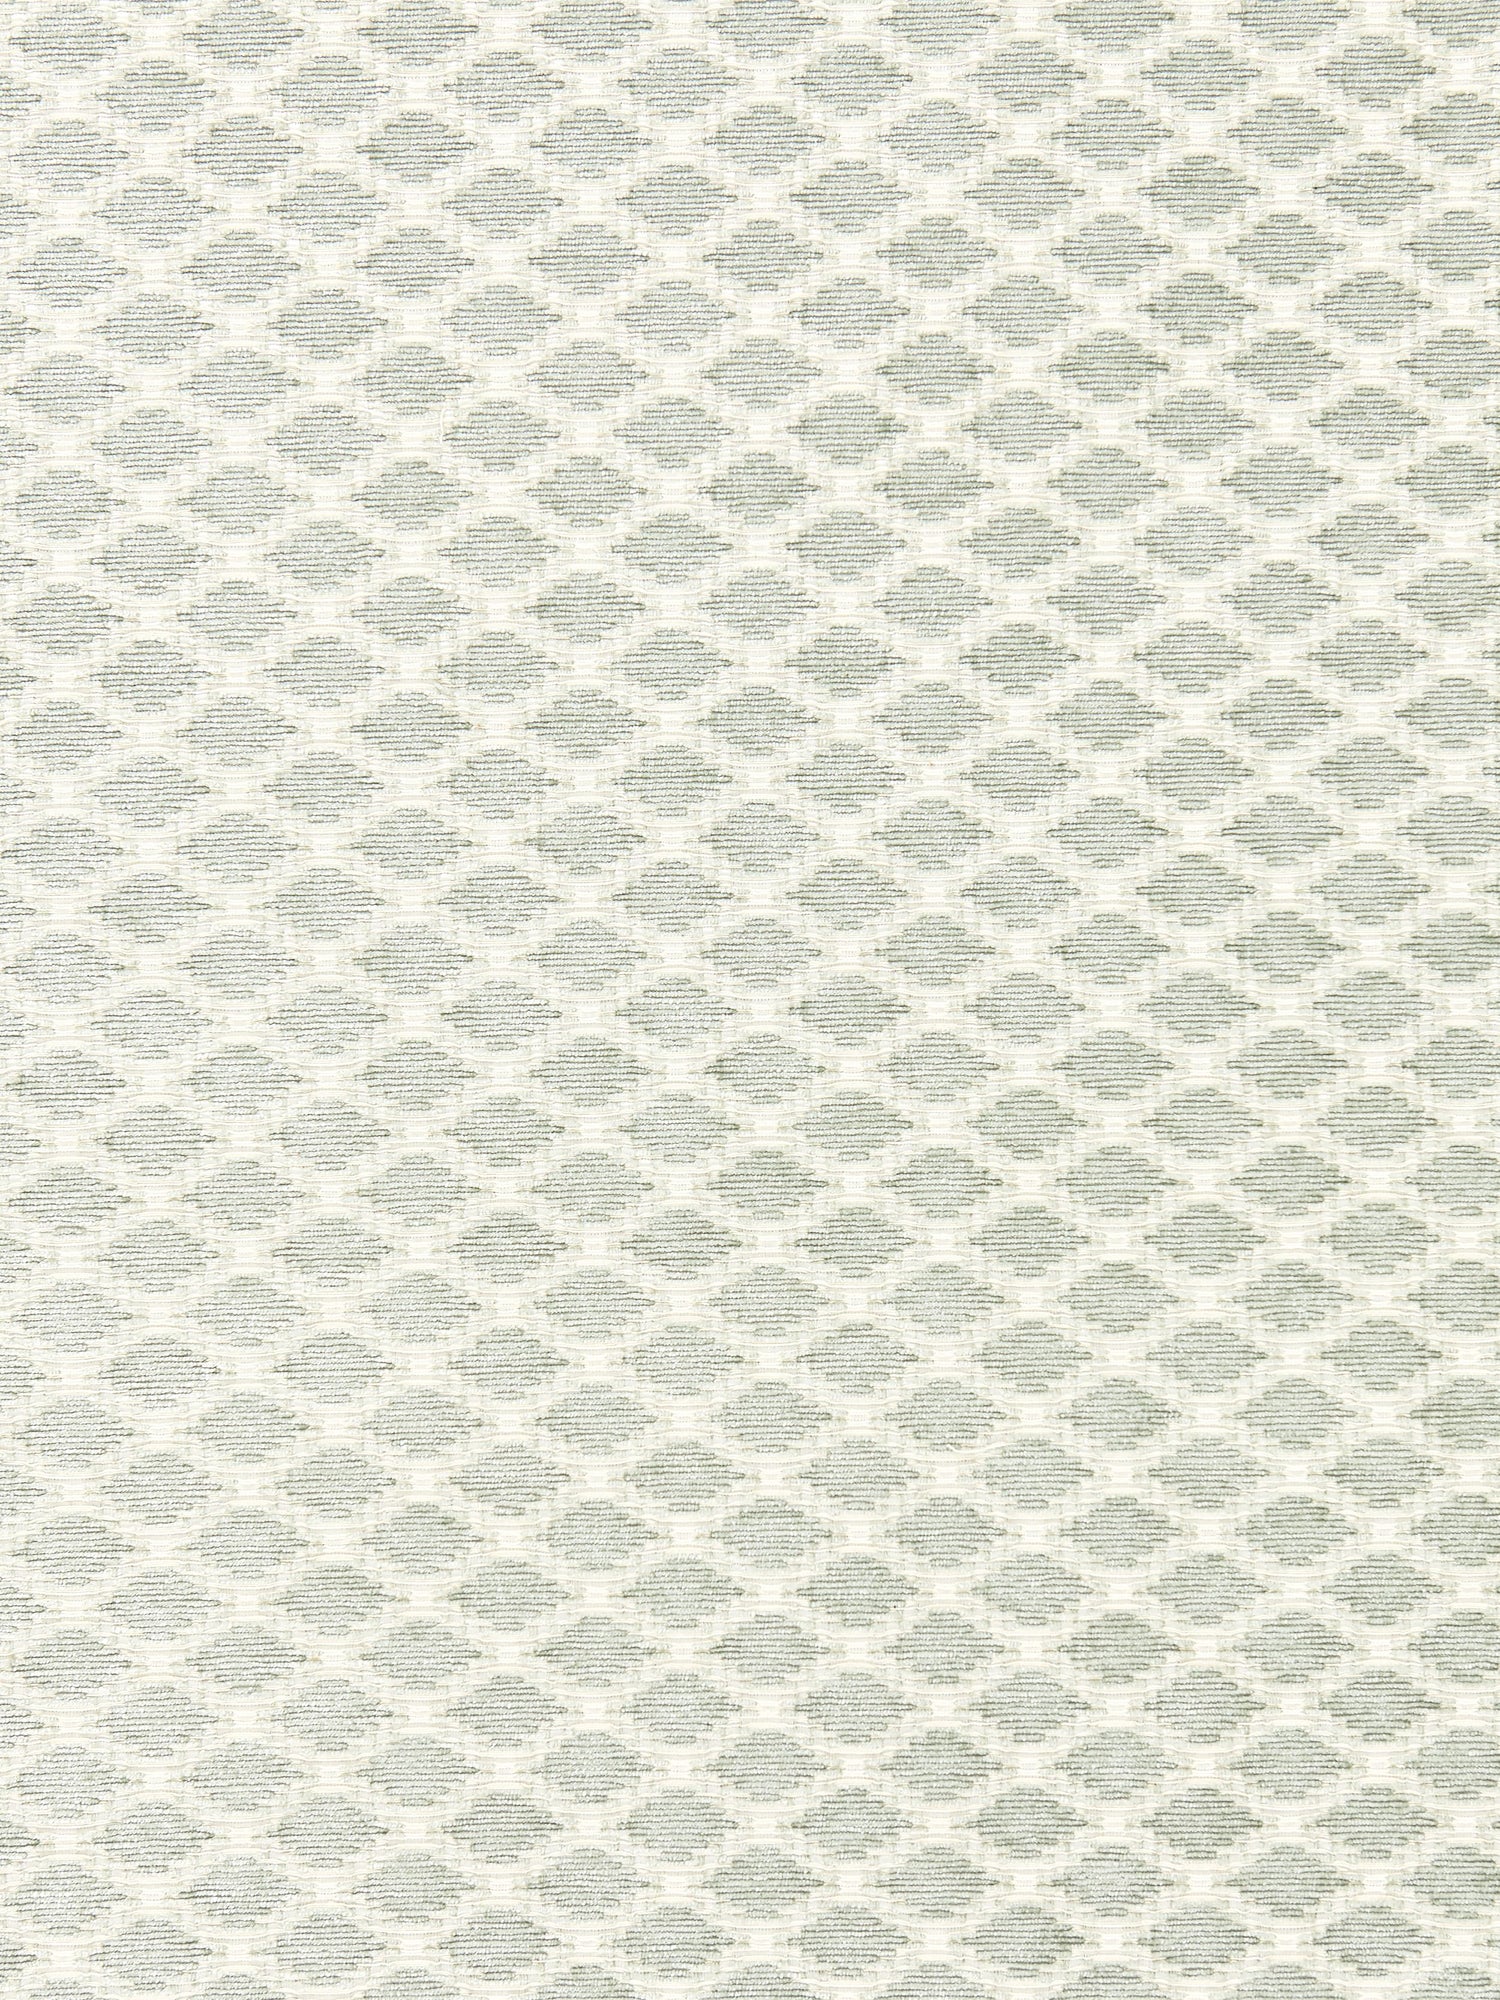 Tristan Weave fabric in rain color - pattern number SC 000227101 - by Scalamandre in the Scalamandre Fabrics Book 1 collection